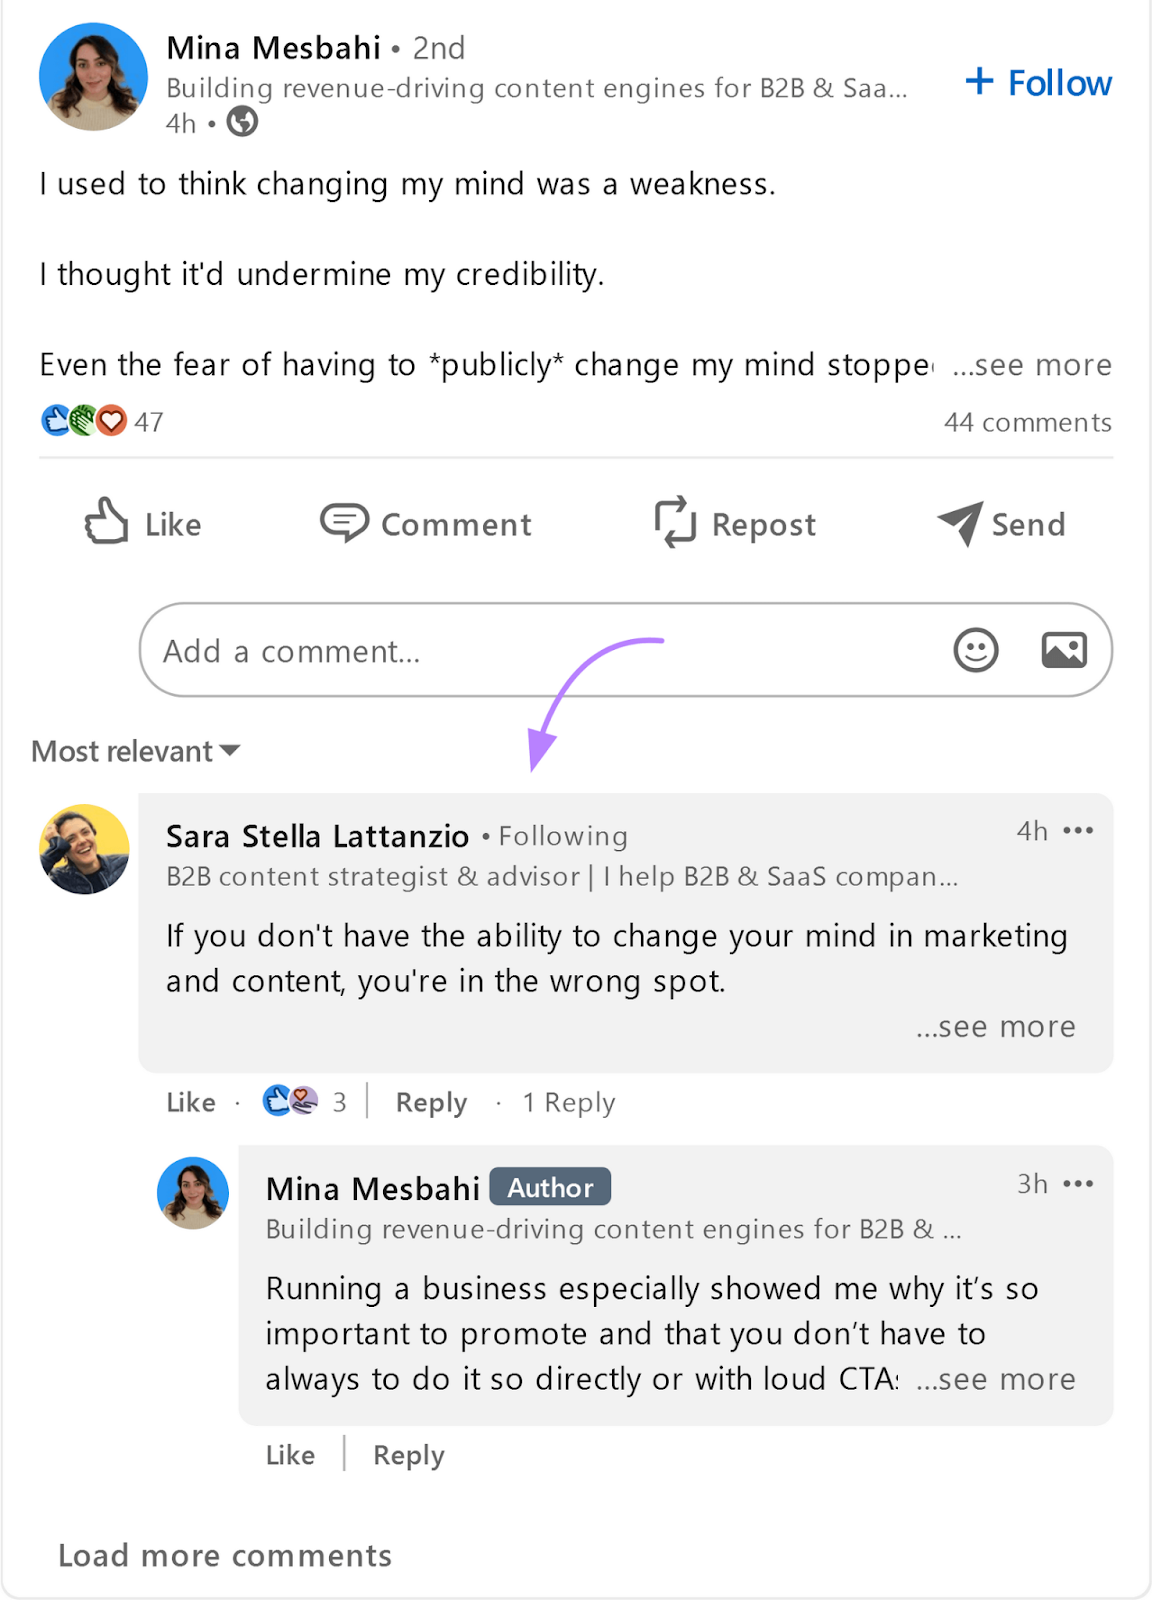 example of an LinkedIn post by Mina Mesbahi with a comment from another user